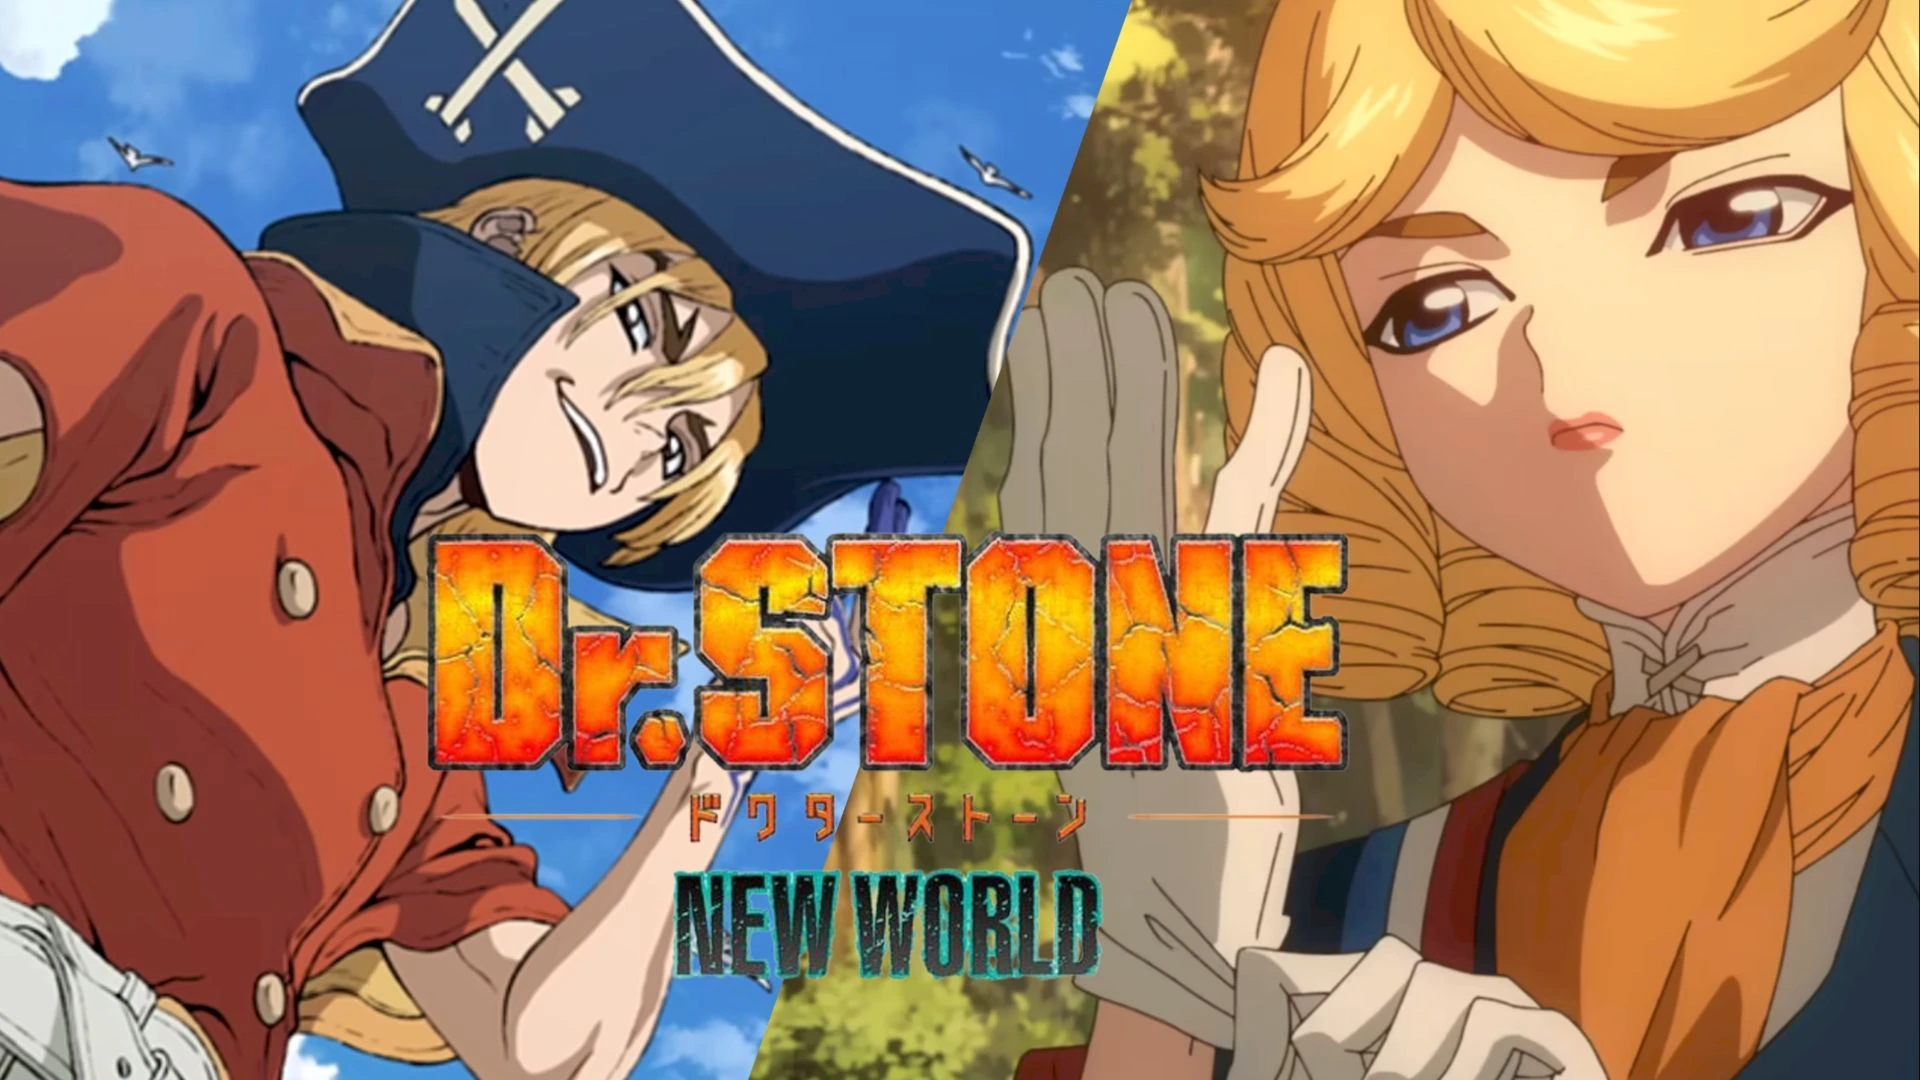 Dr. Stone Season 3 Episode 4 Release Date, Preview, Recap, Watch Online, and More